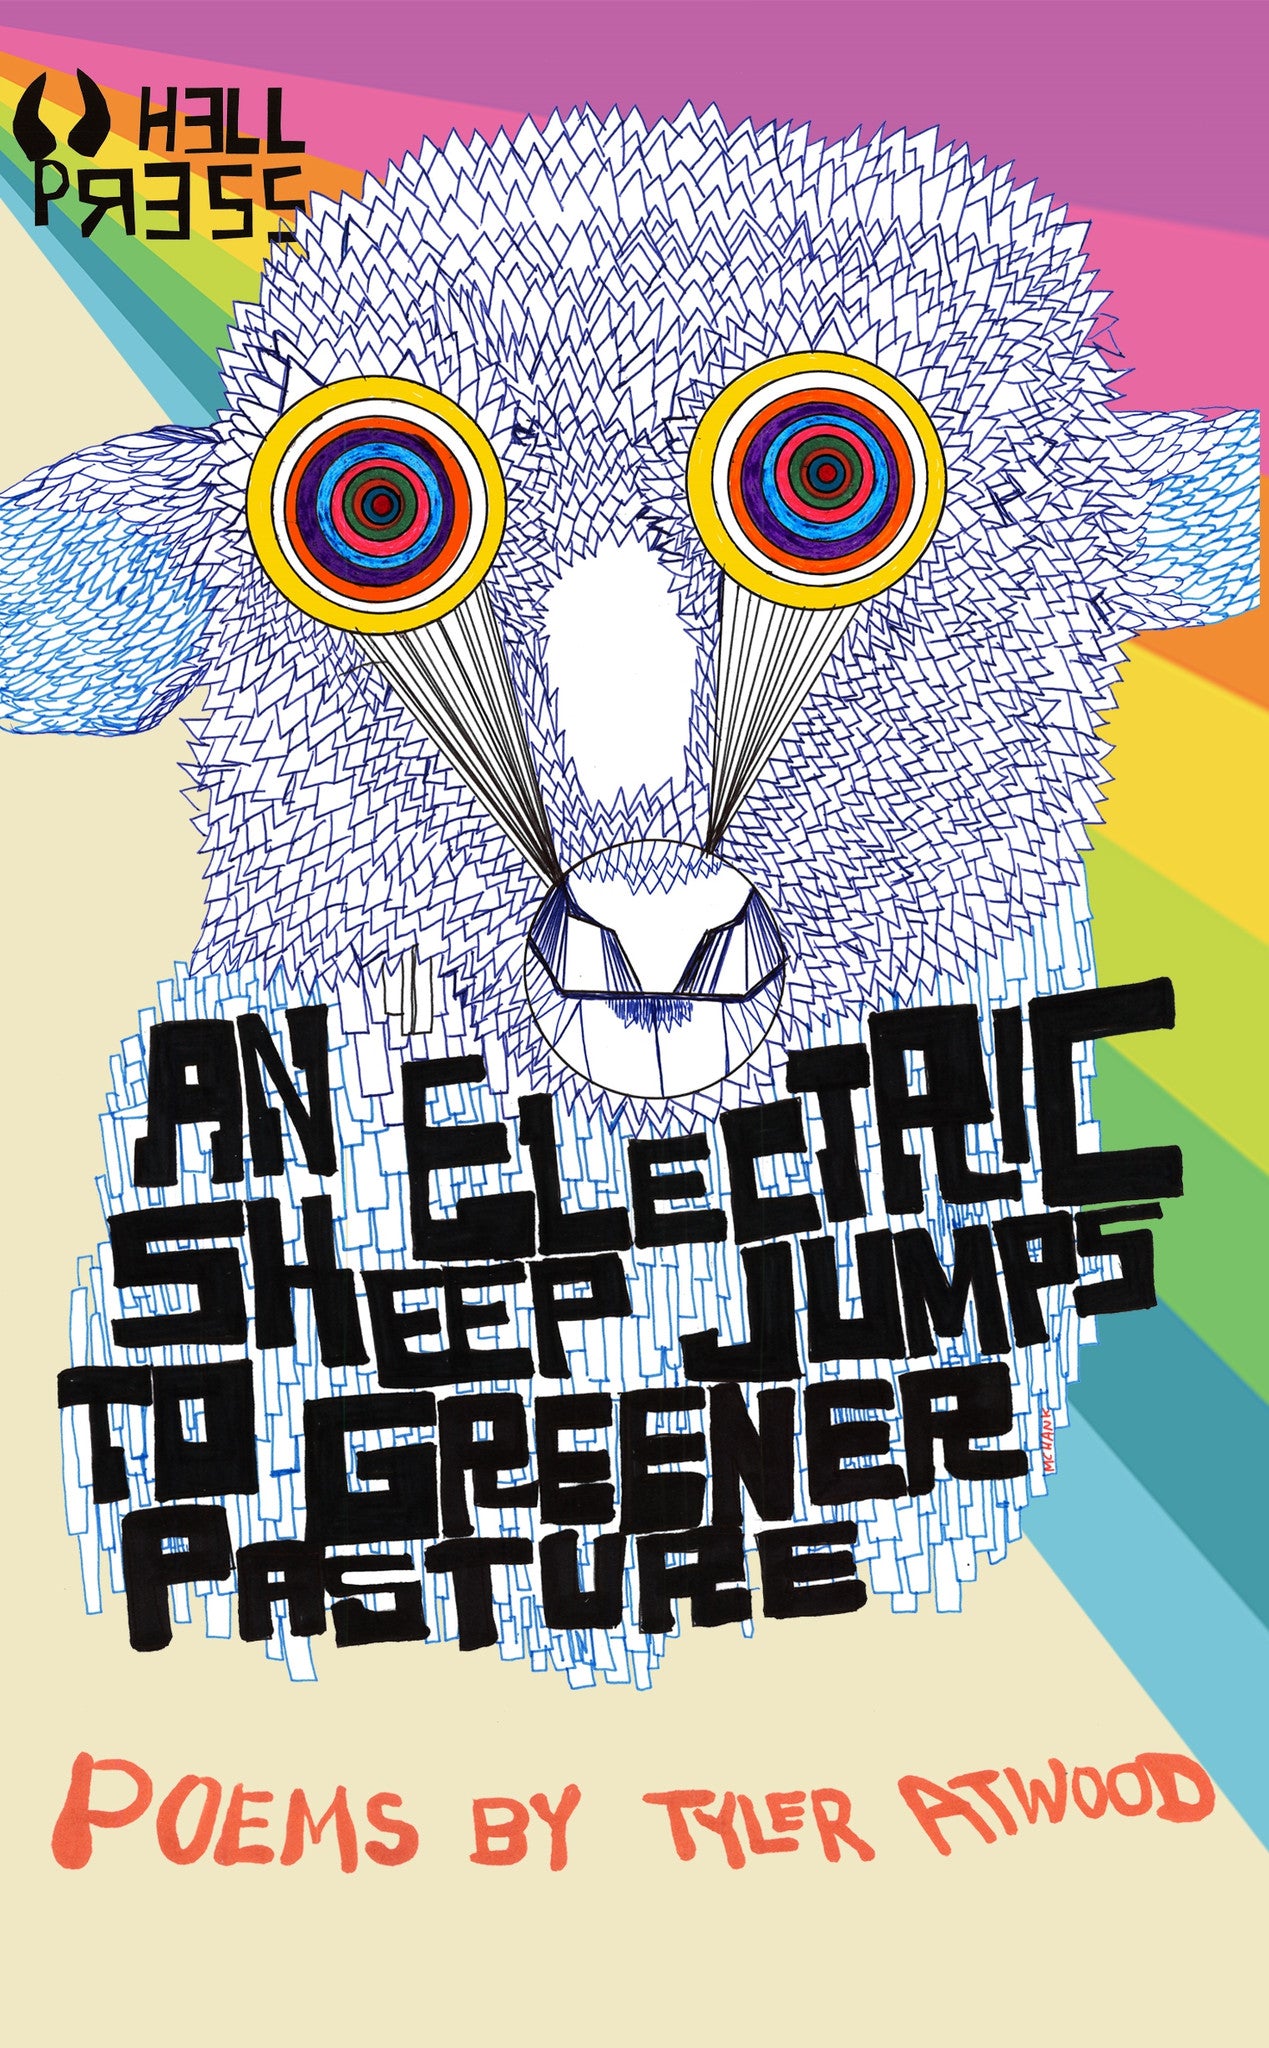 an electric sheep jumps to greener pasture by Tyler Atwood